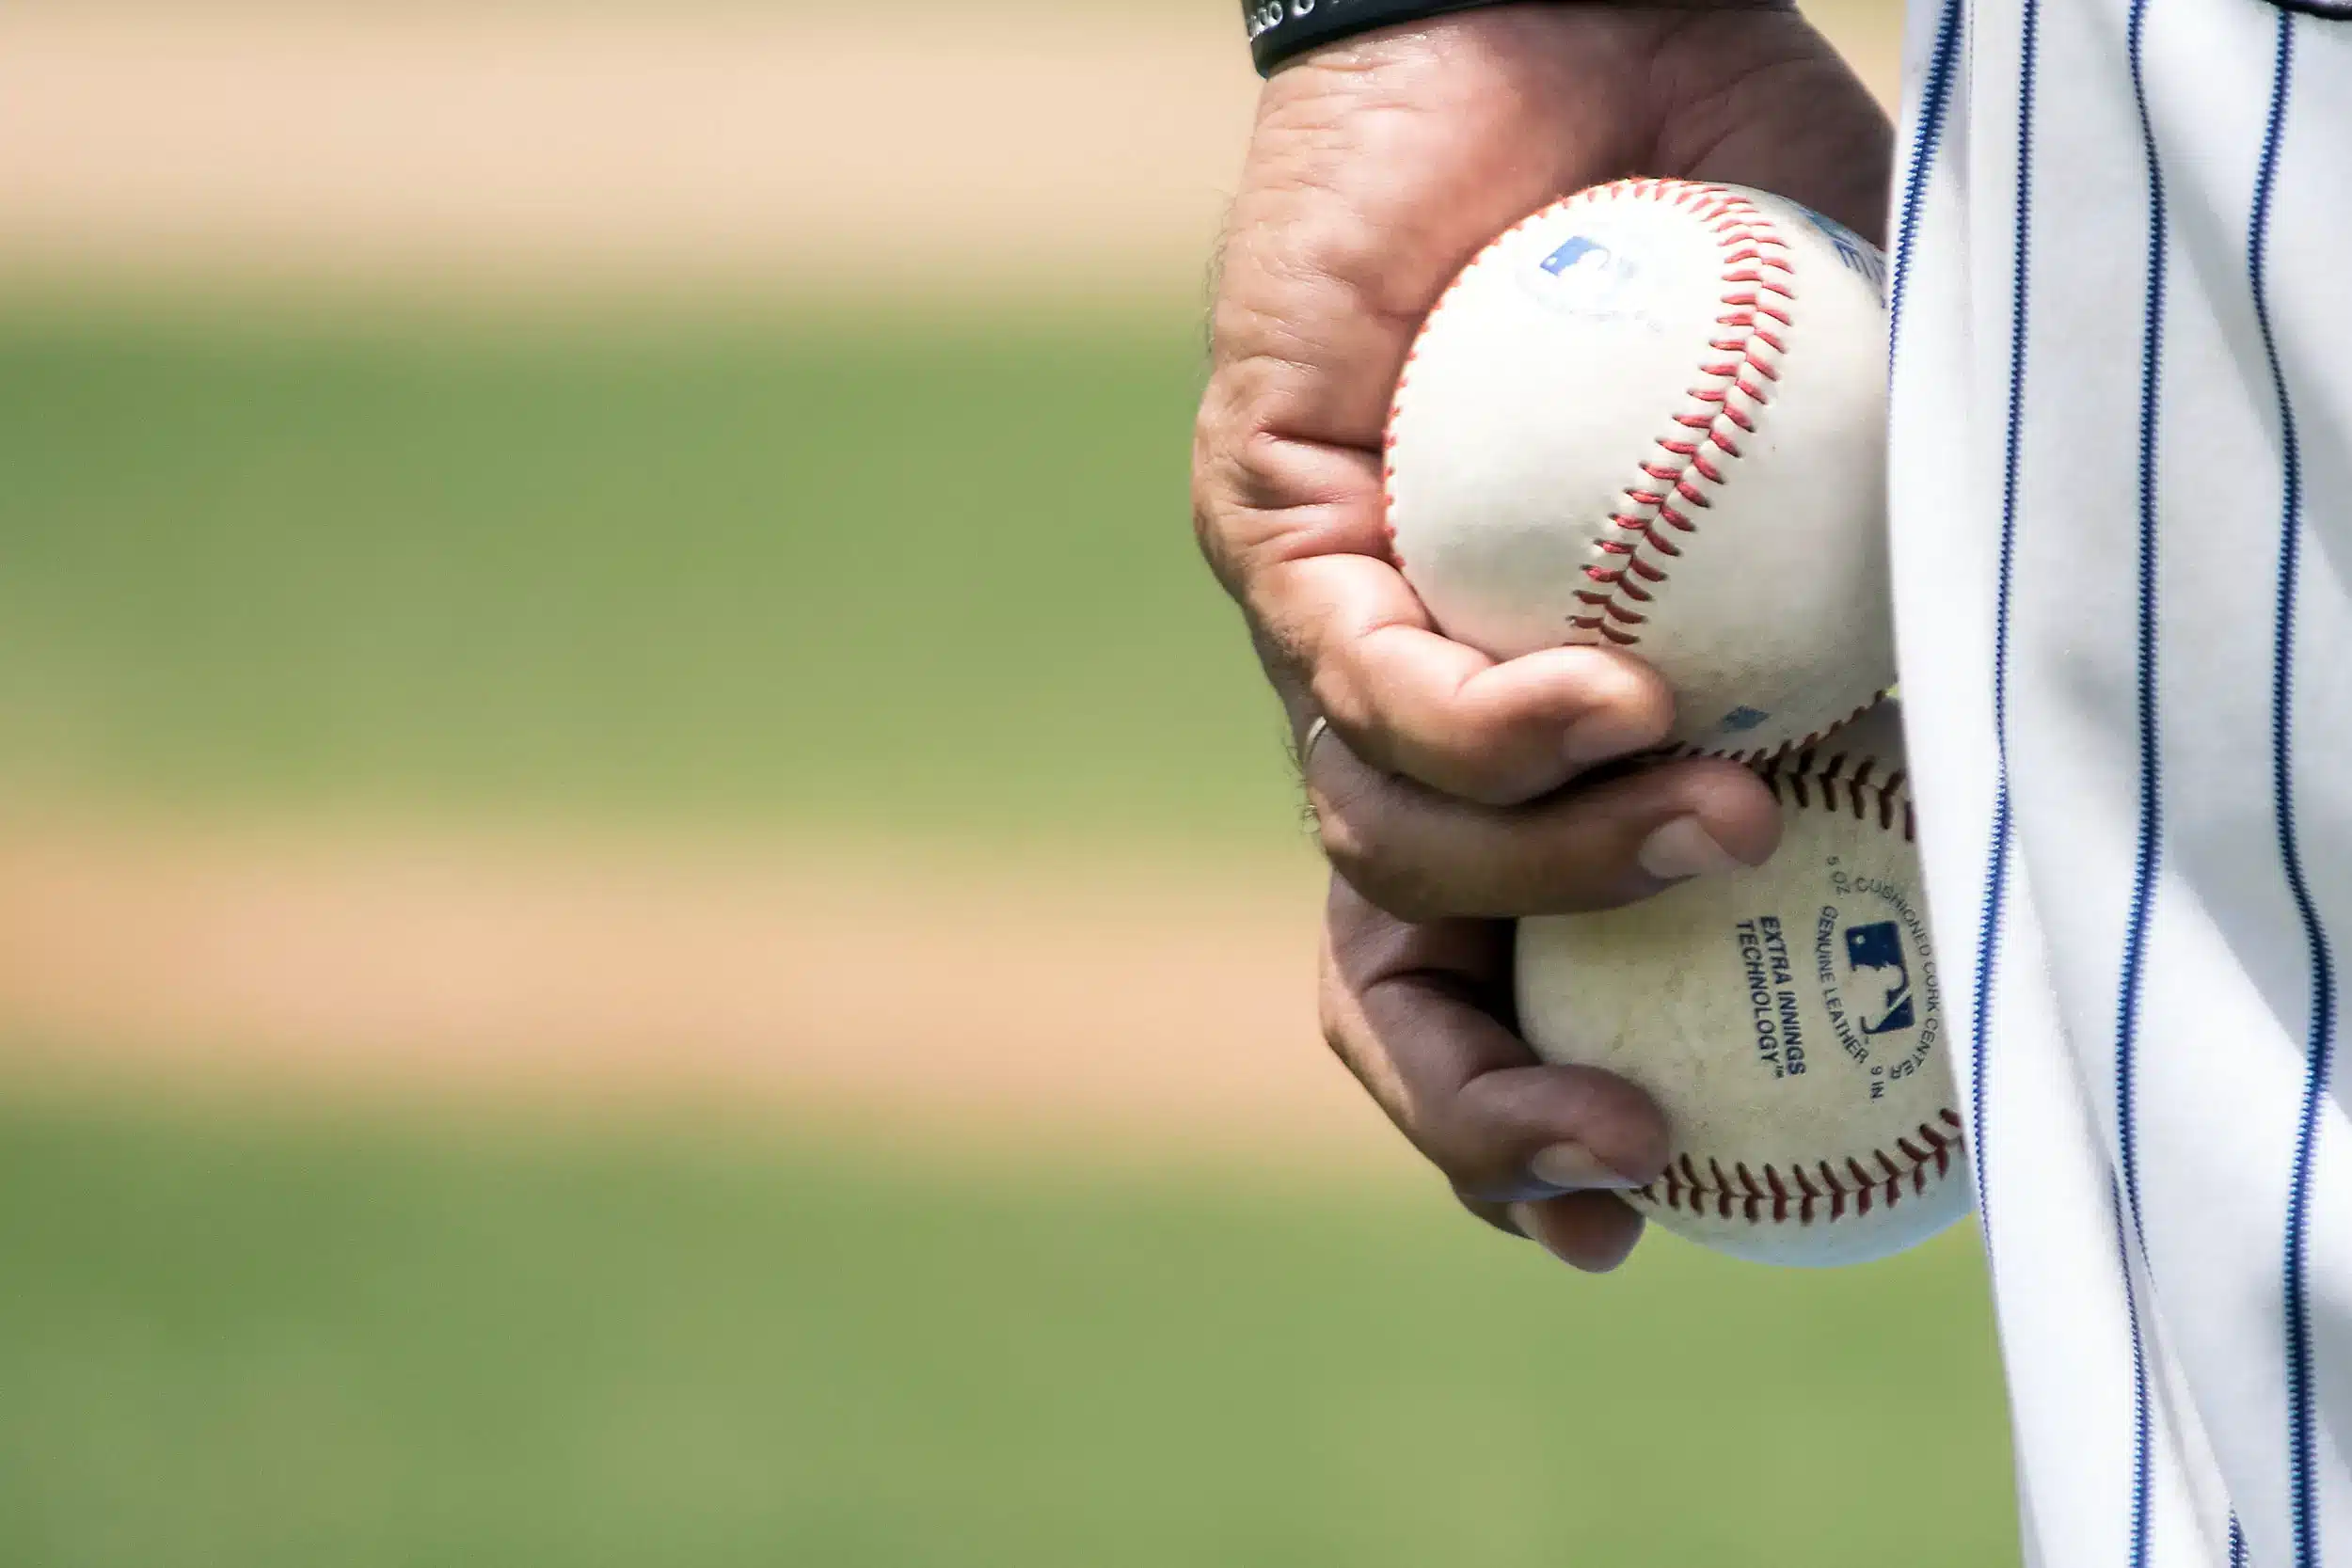 Baseball pitcher holding two baseballs in one hand